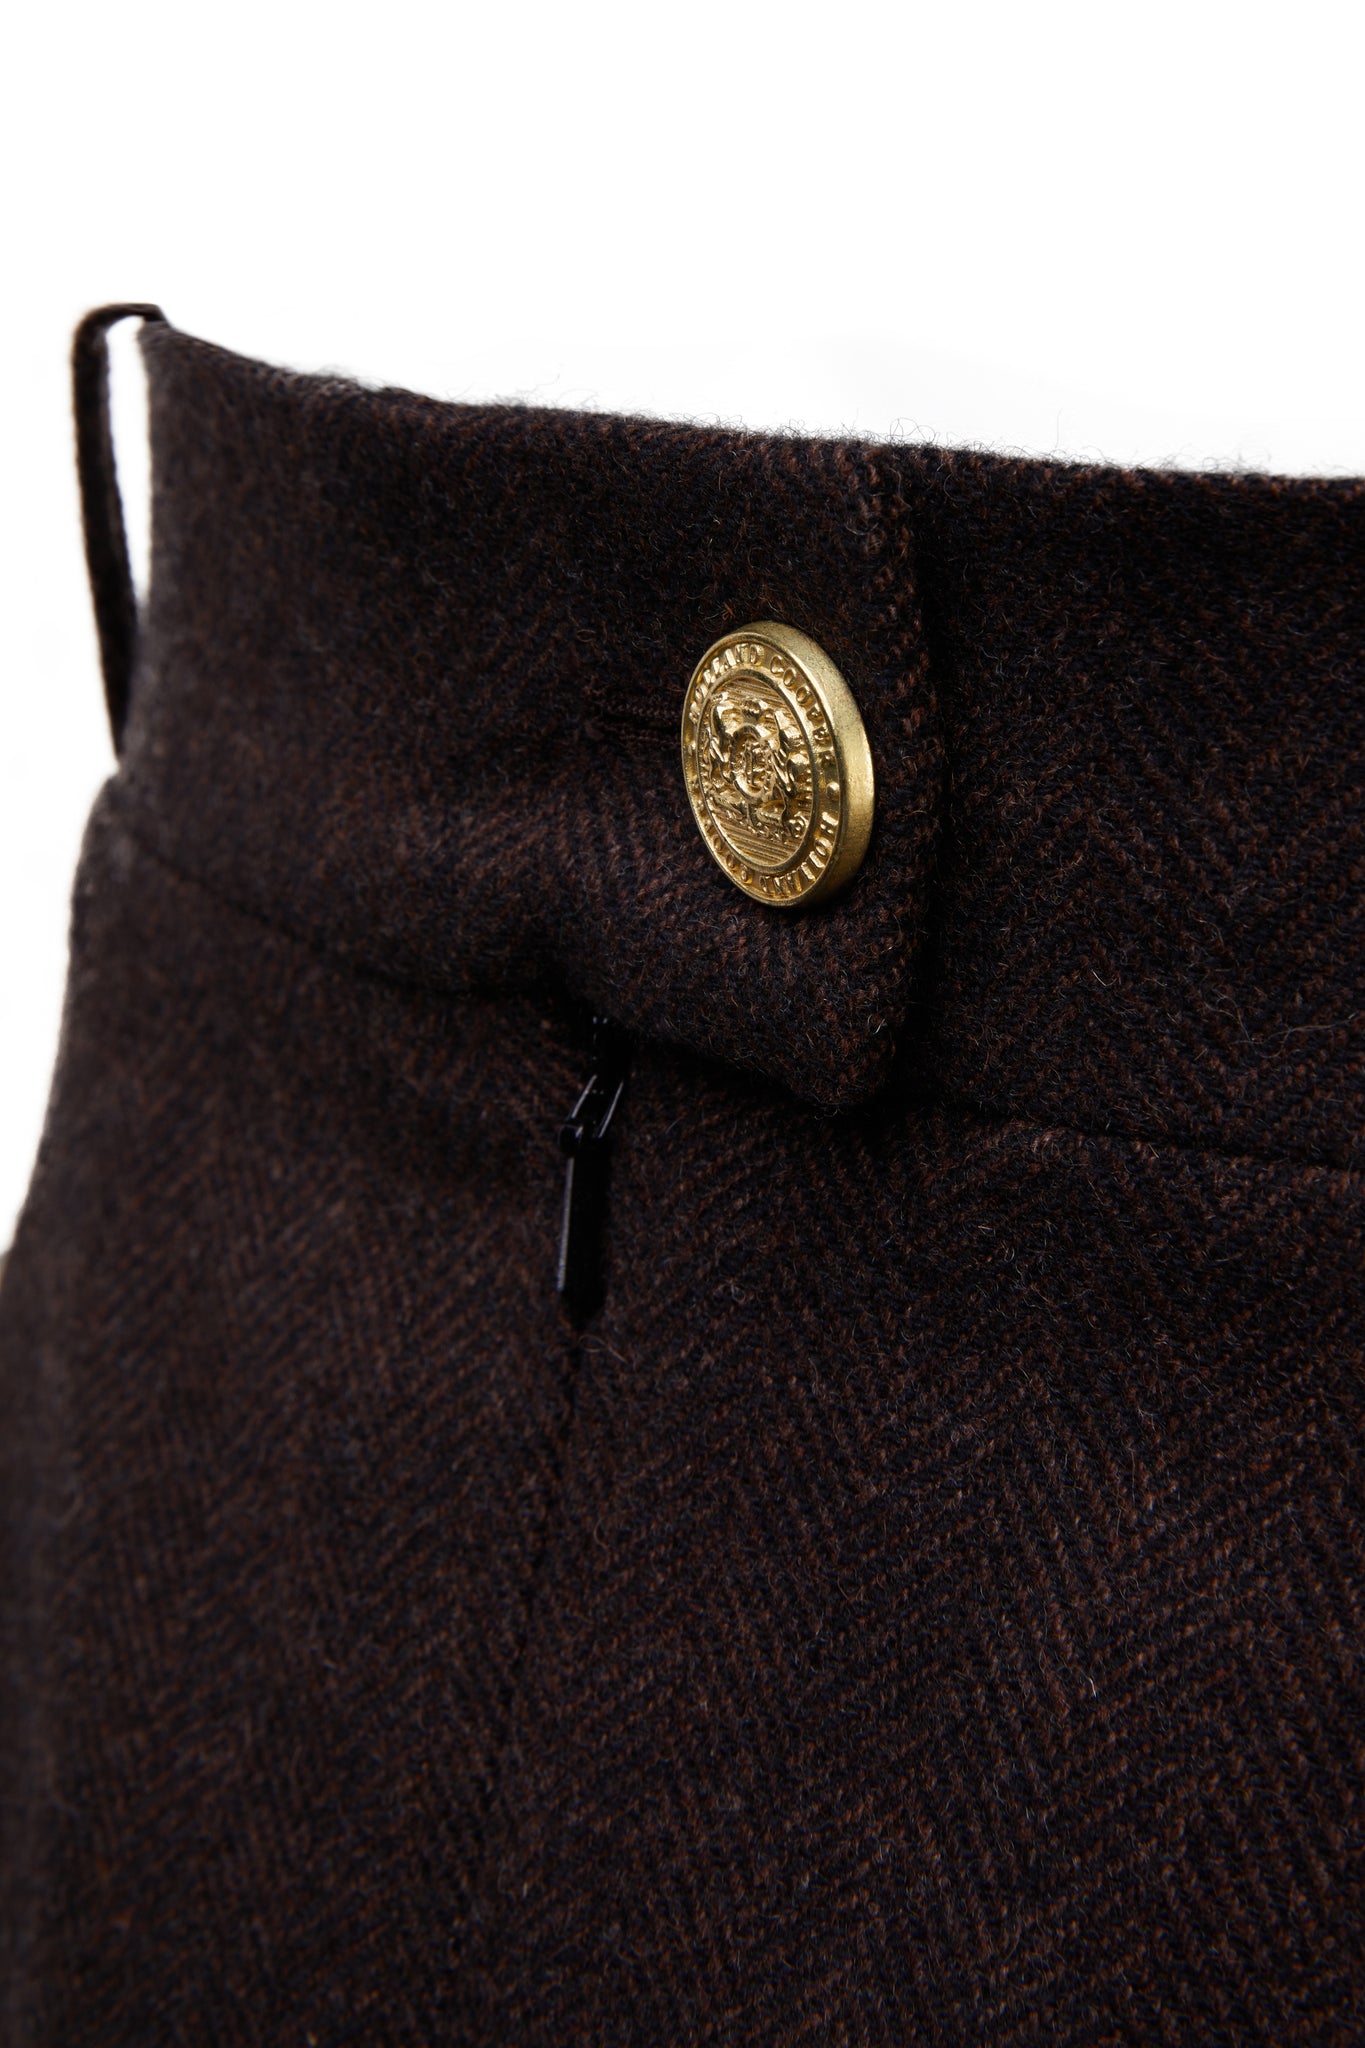 gold button detail on back waistband of womens brown wool pencil mini skirt with concealed zip fastening on centre back with gold hc button above zip